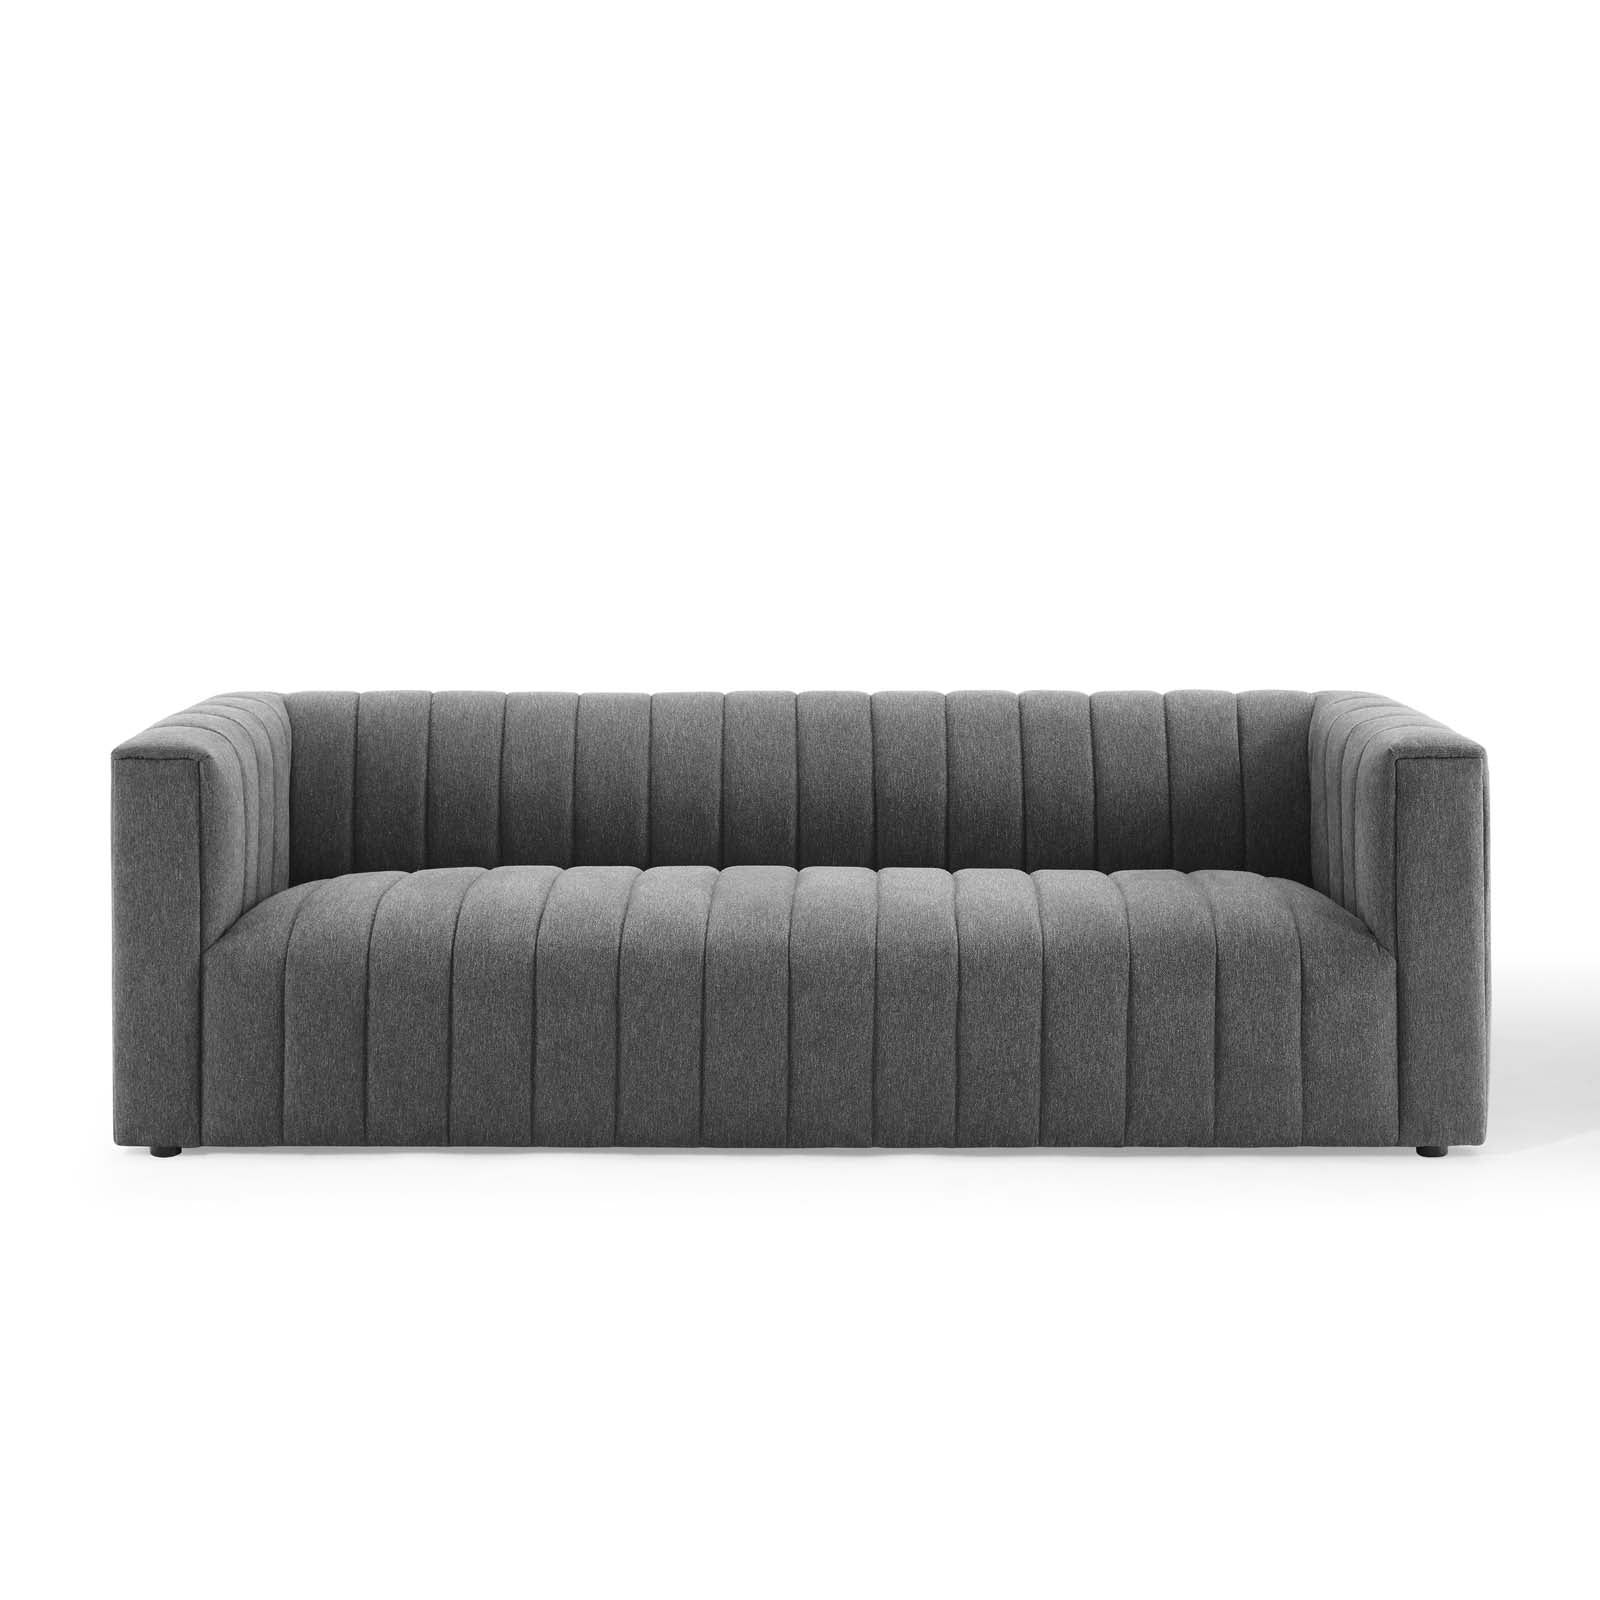 Reflection Channel Tufted Upholstered Fabric Sofa